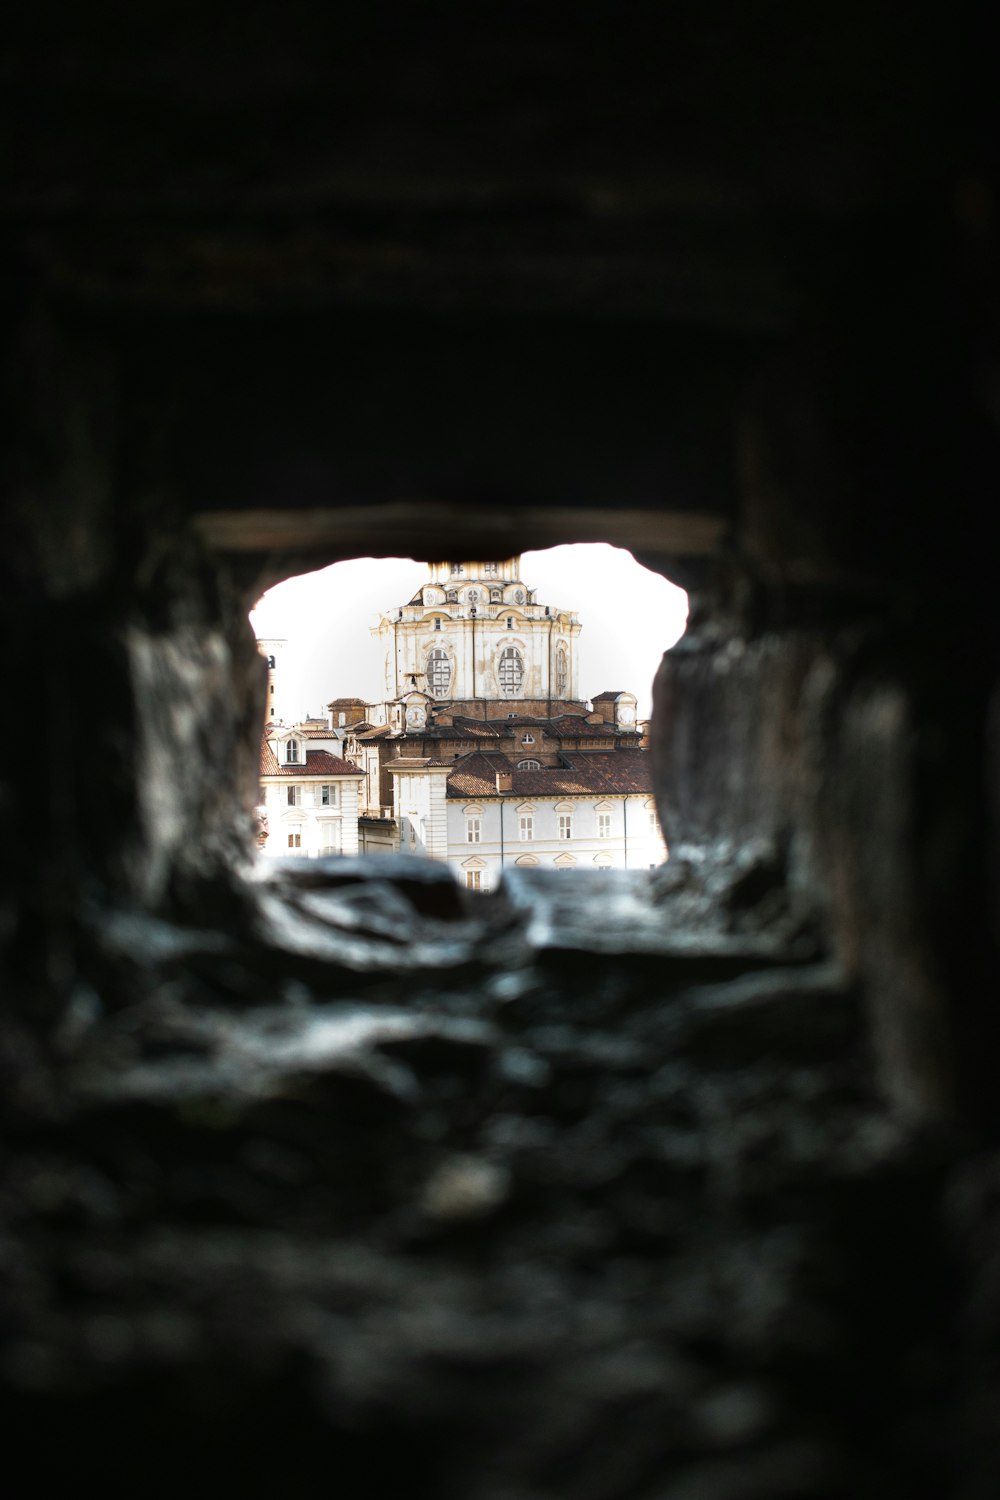 a view of a building through a hole in the ground